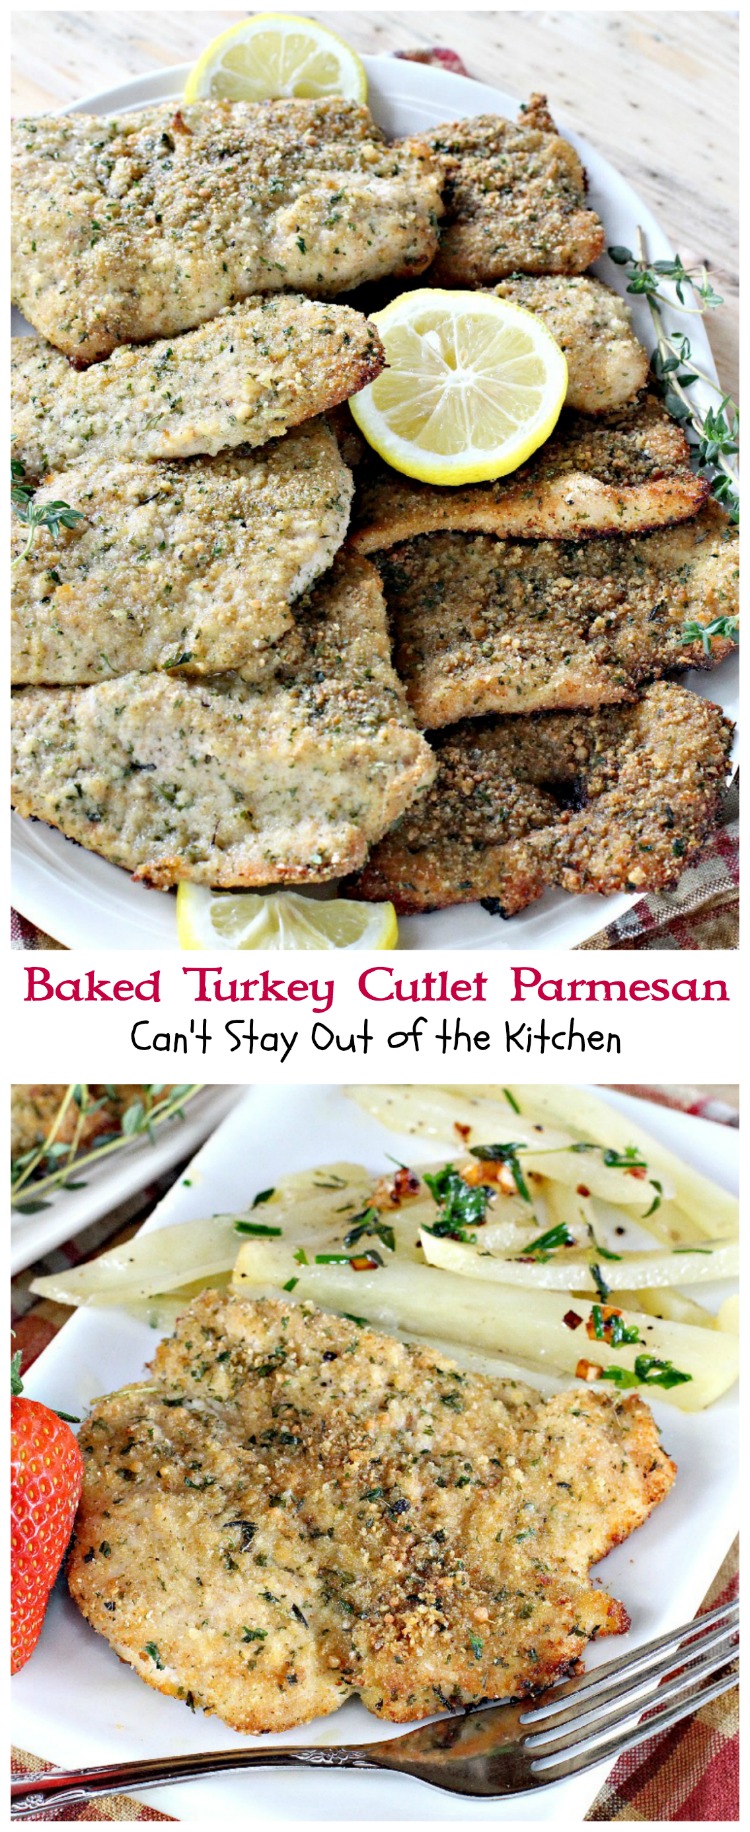 Baked Turkey Cutlet Parmesan - Can't Stay Out of the Kitchen